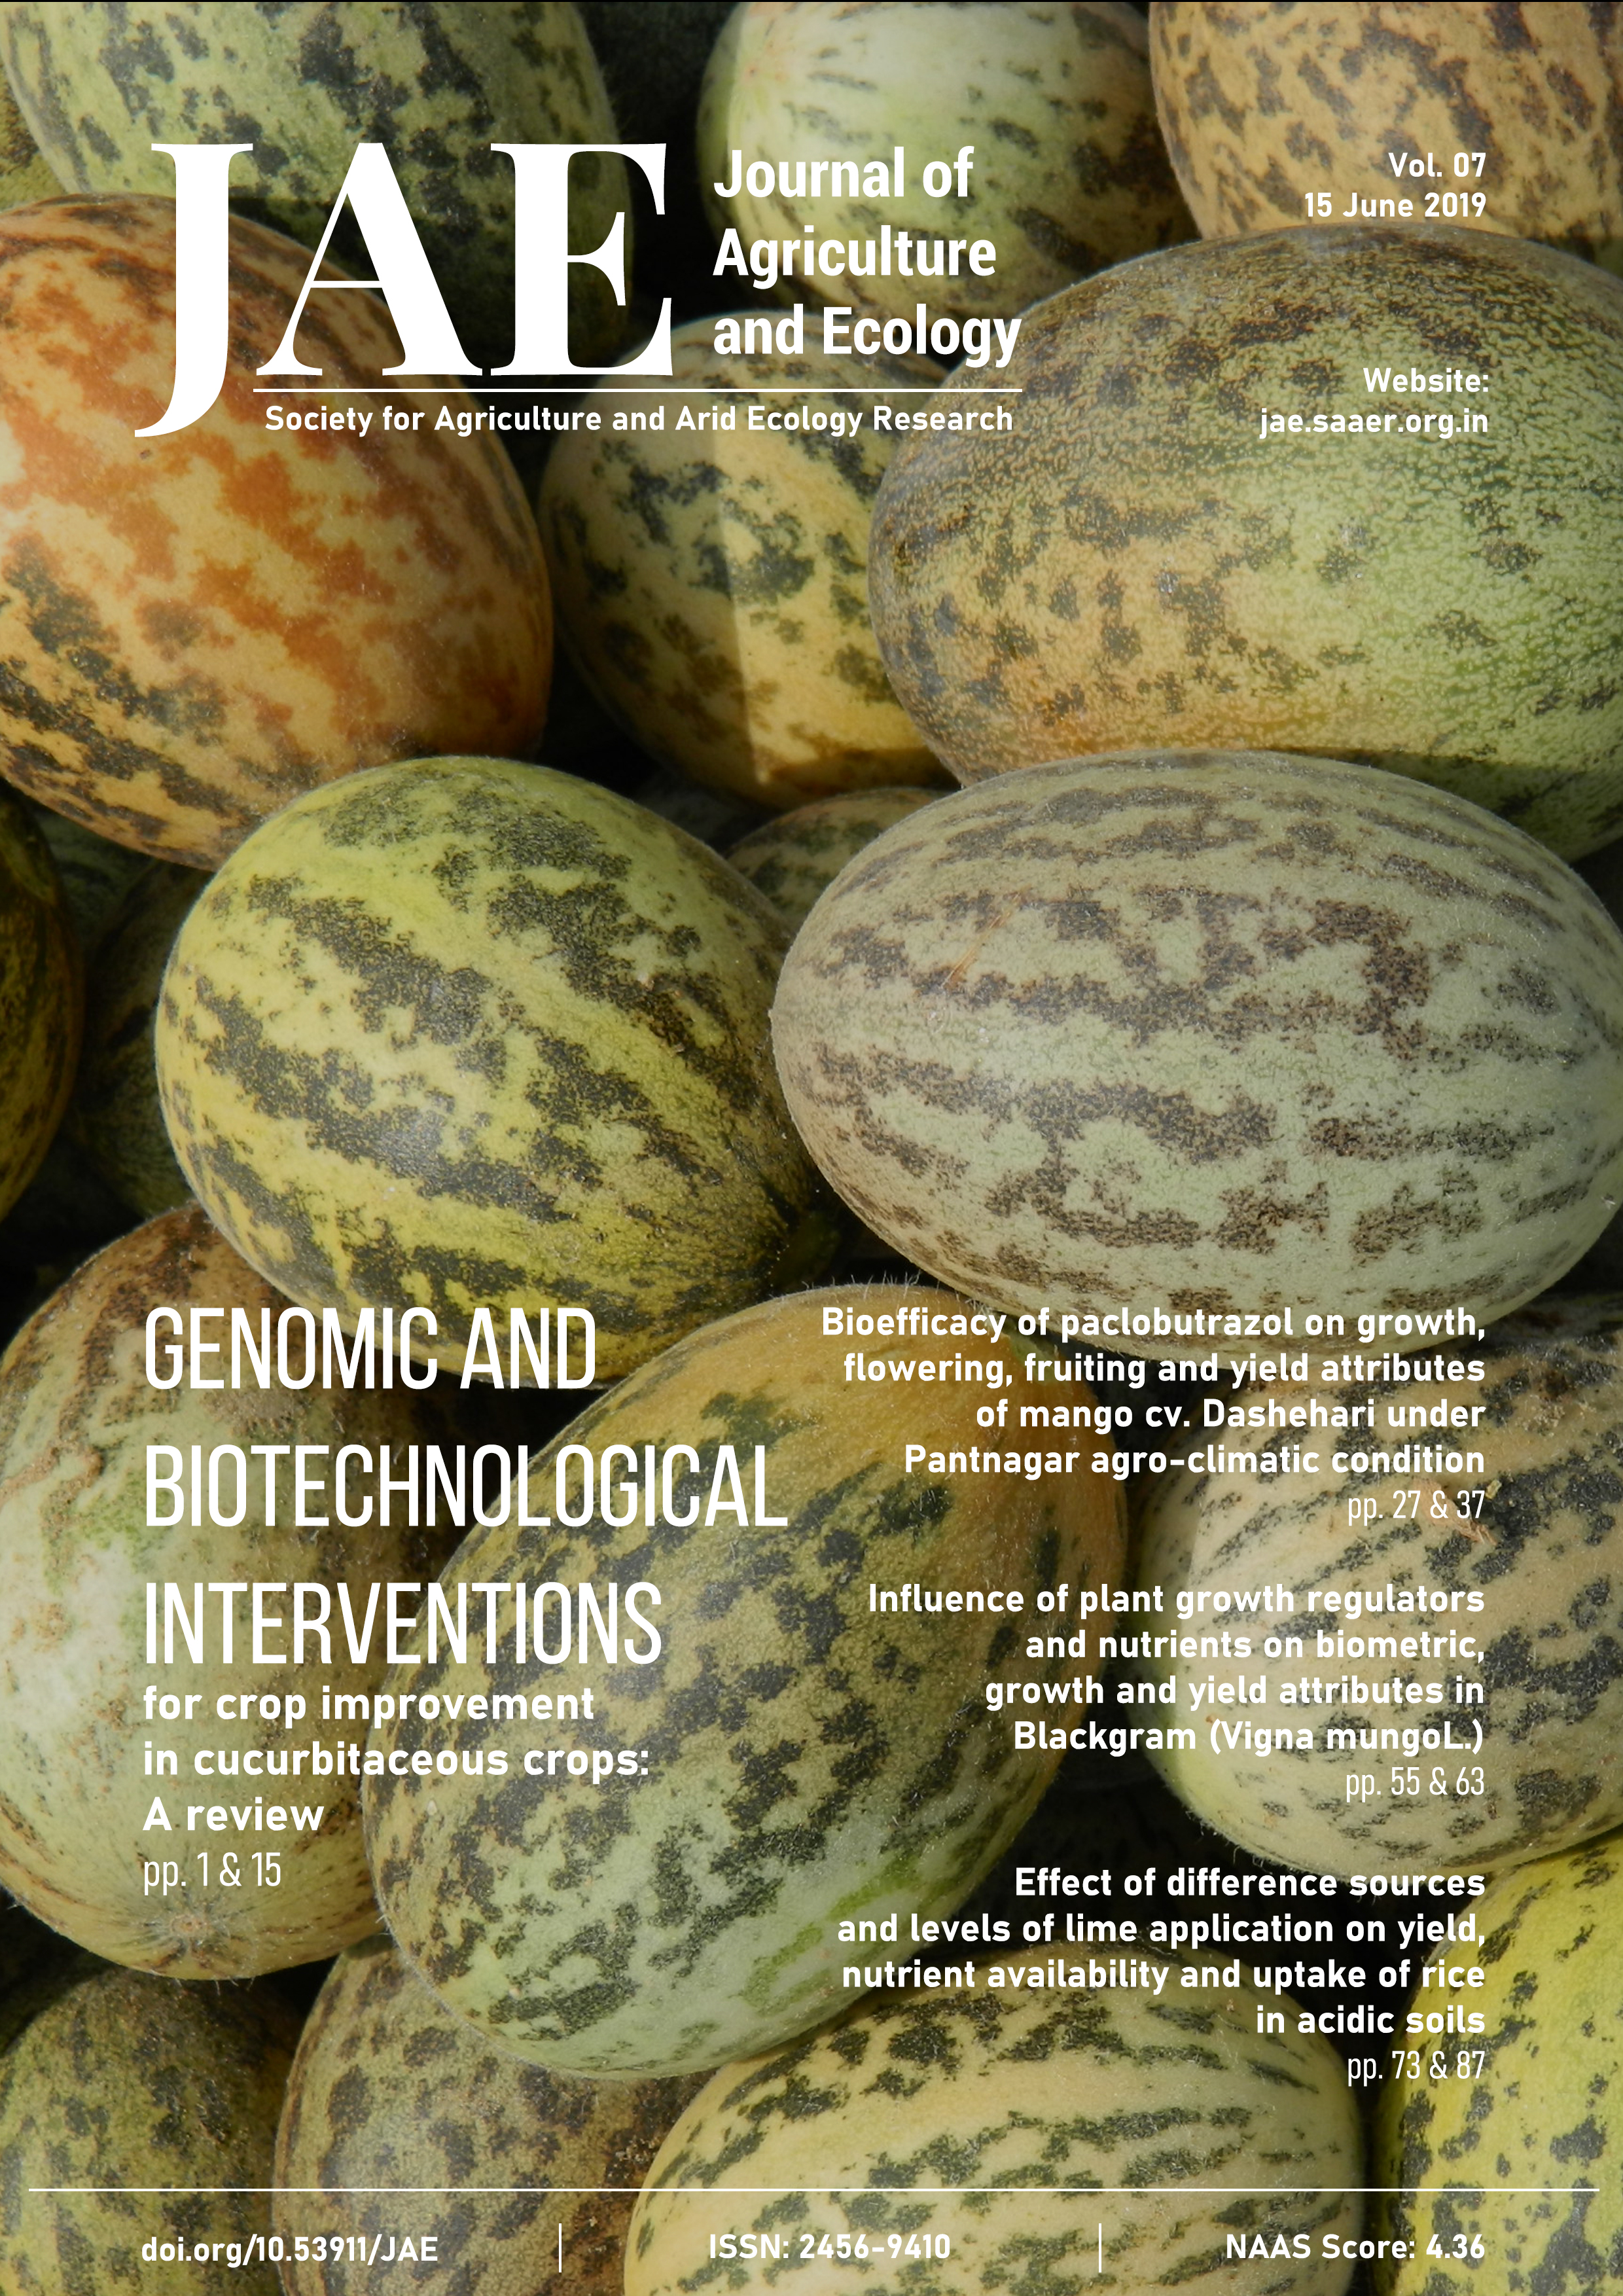 Journal of Agriculture and Ecology Issue 07 Cover